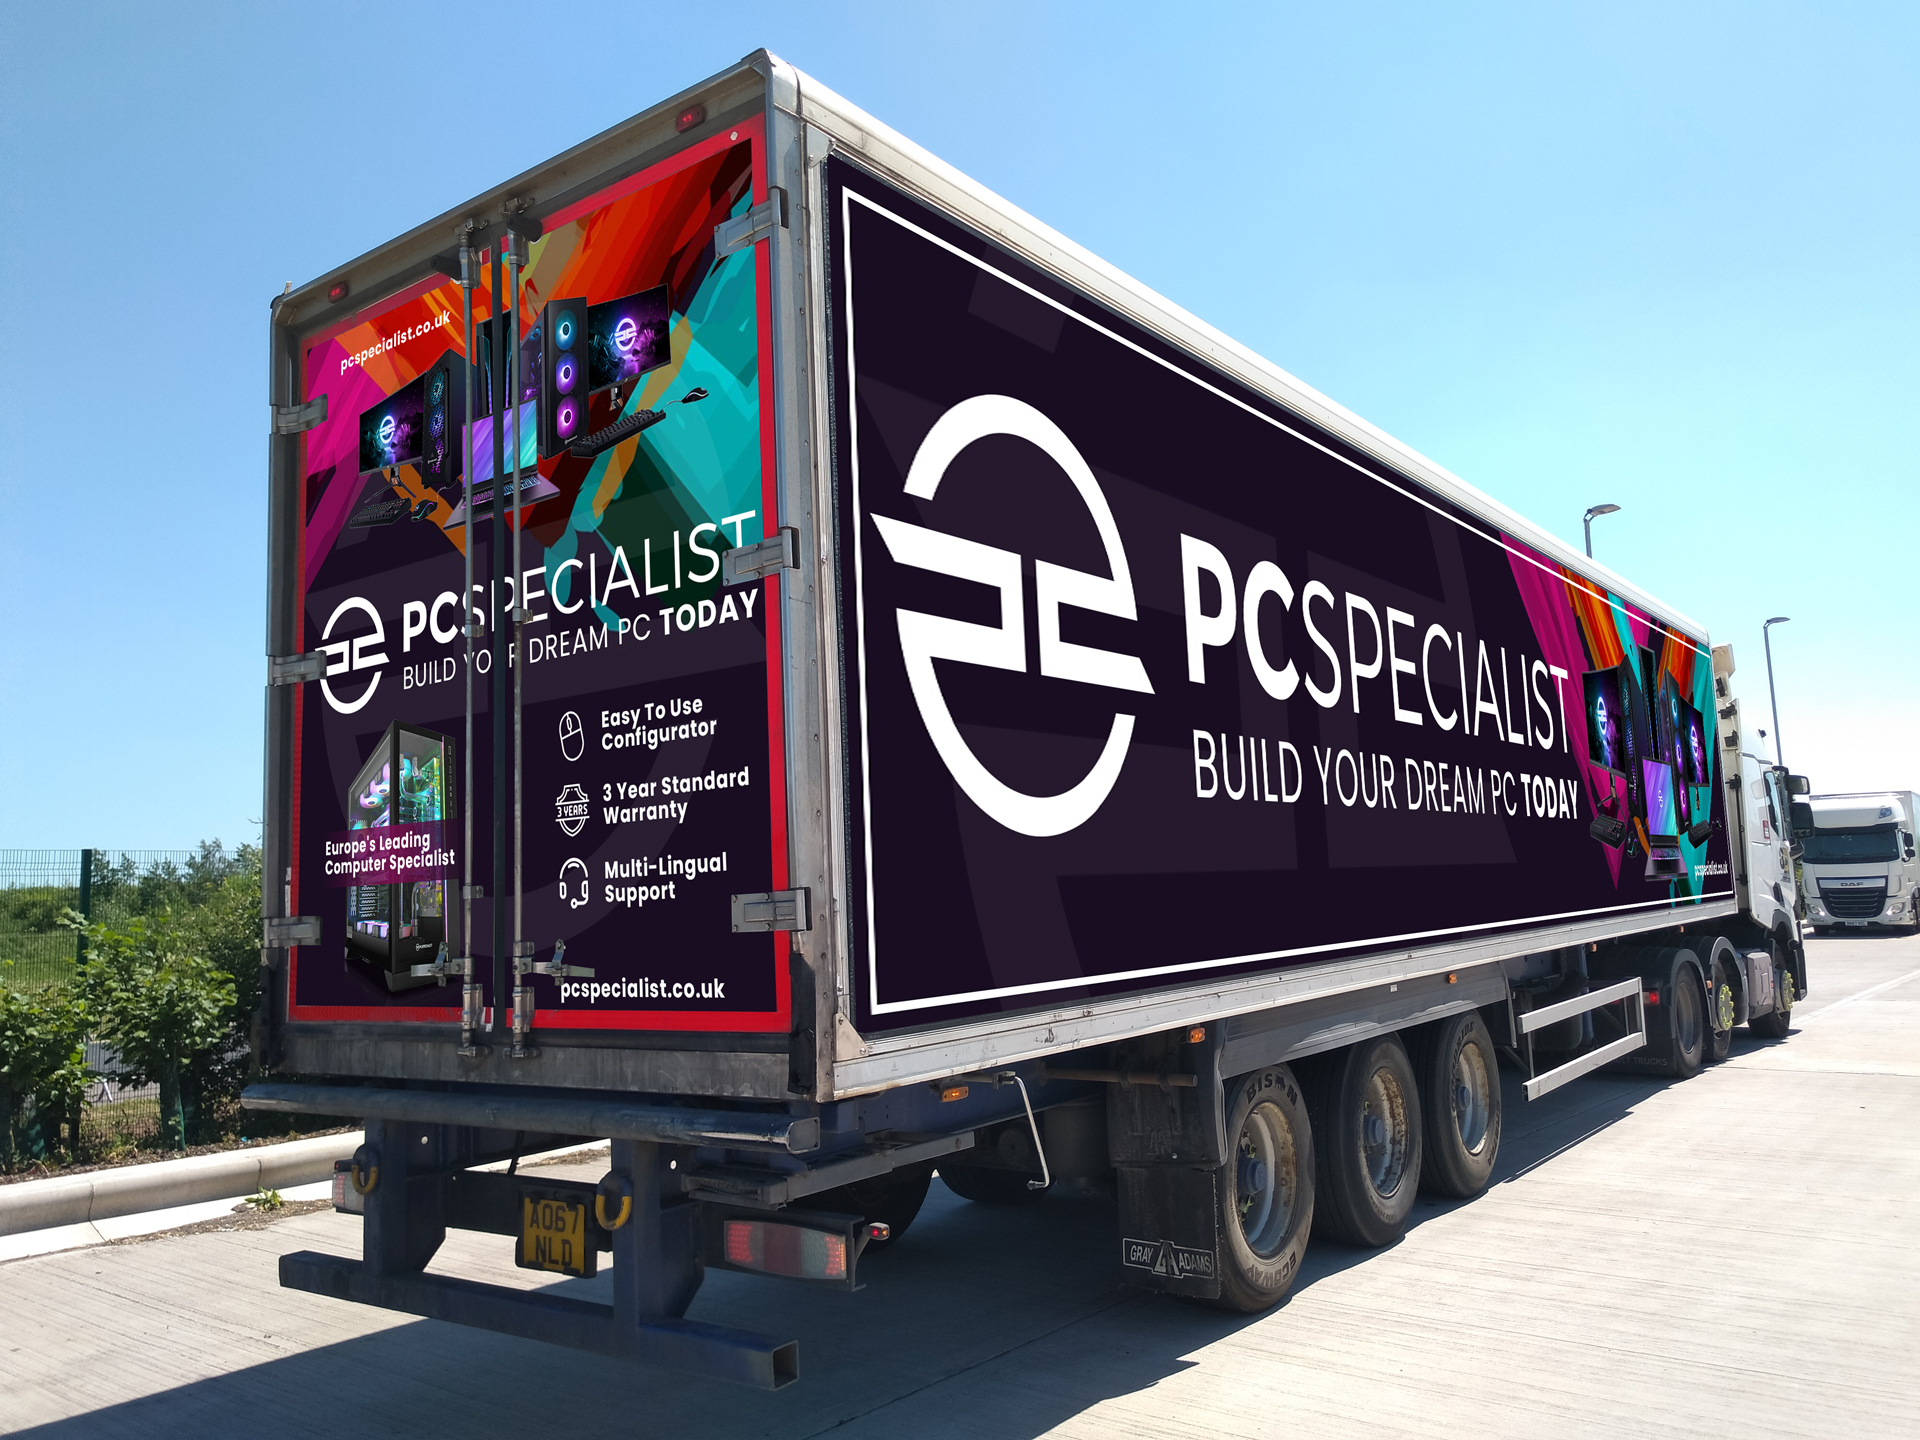 PC Specialist Truck Advertising